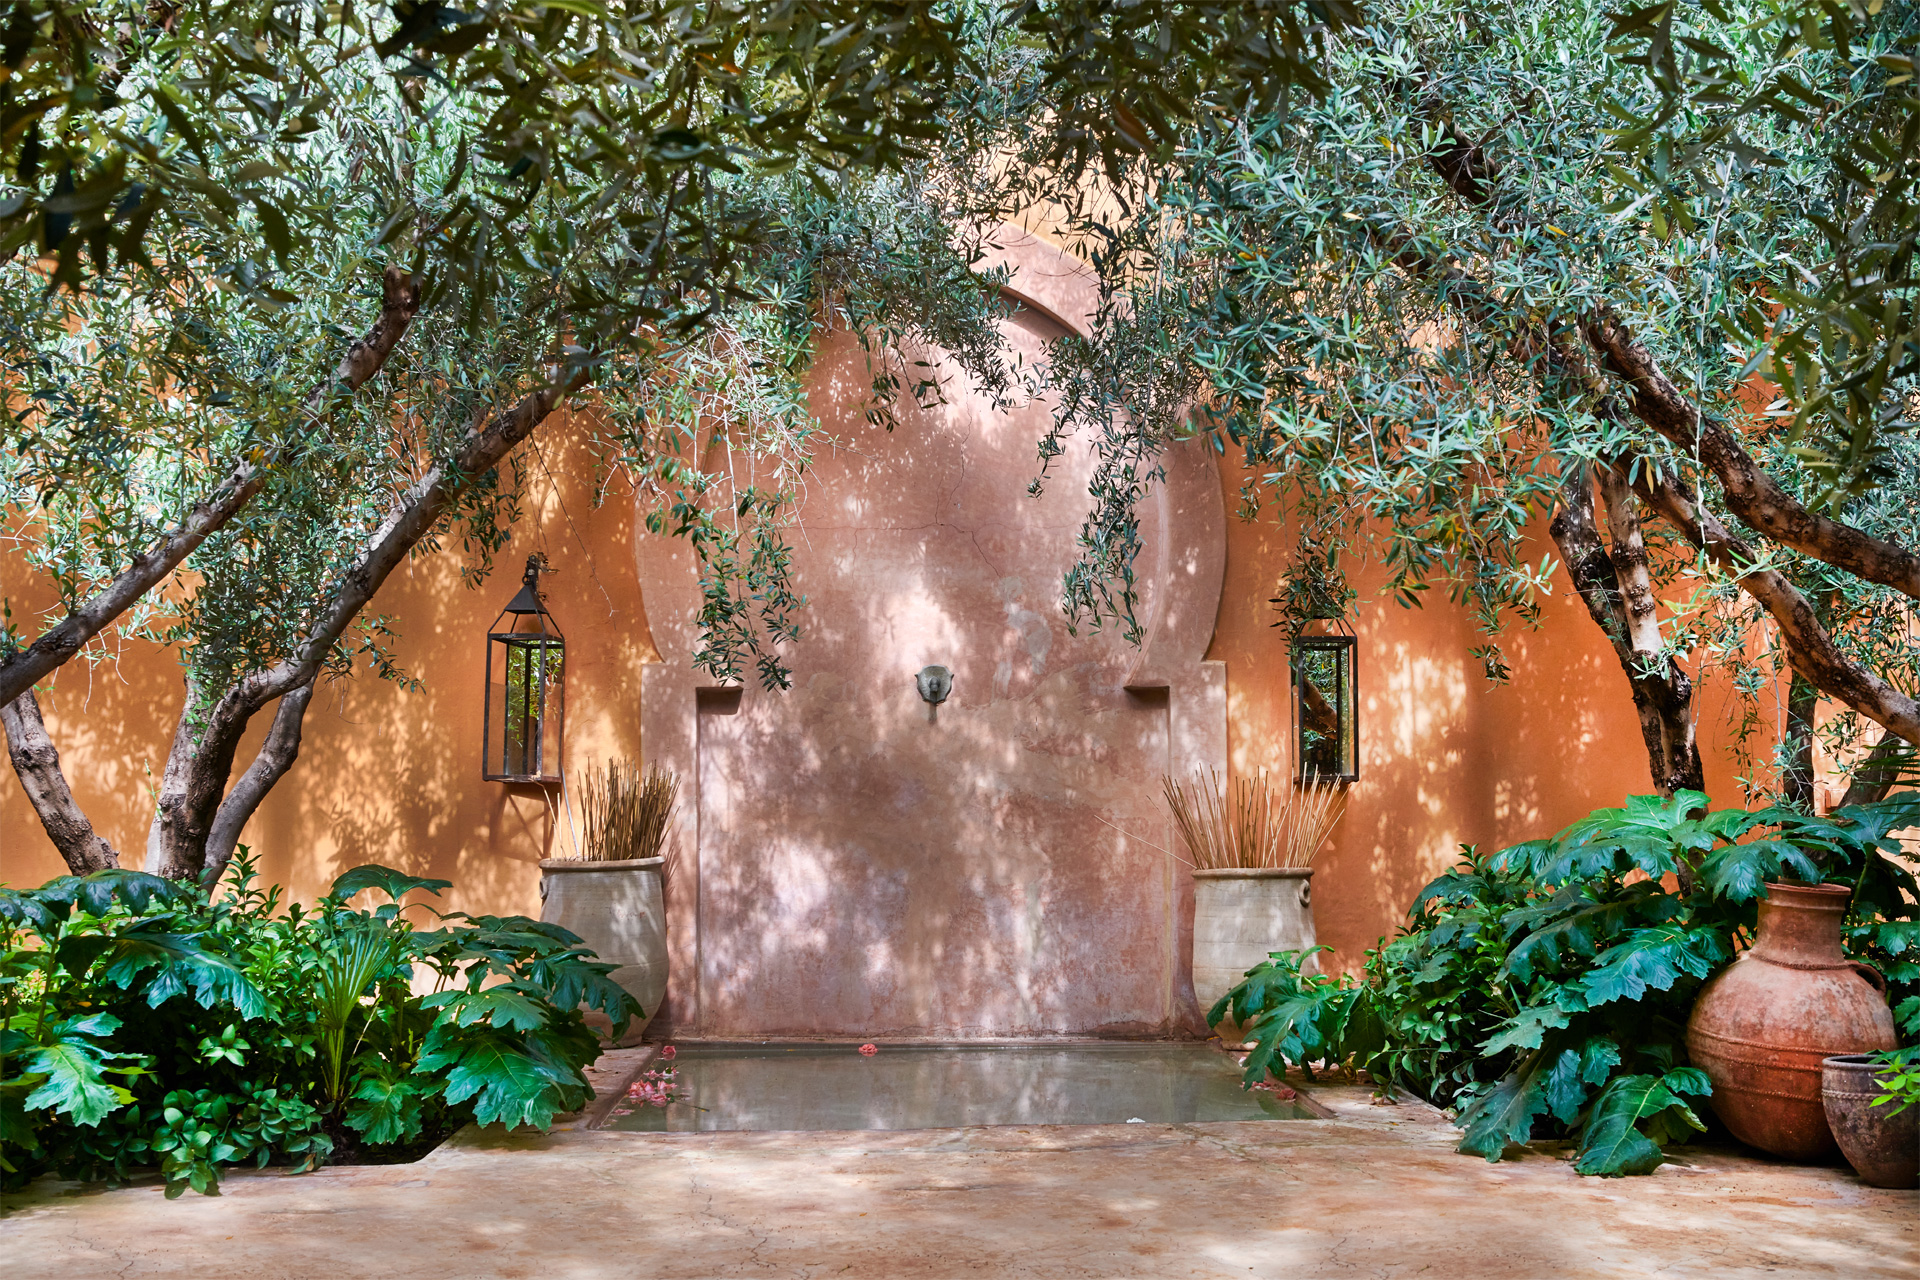 Courtyard with orange walls and palm trees